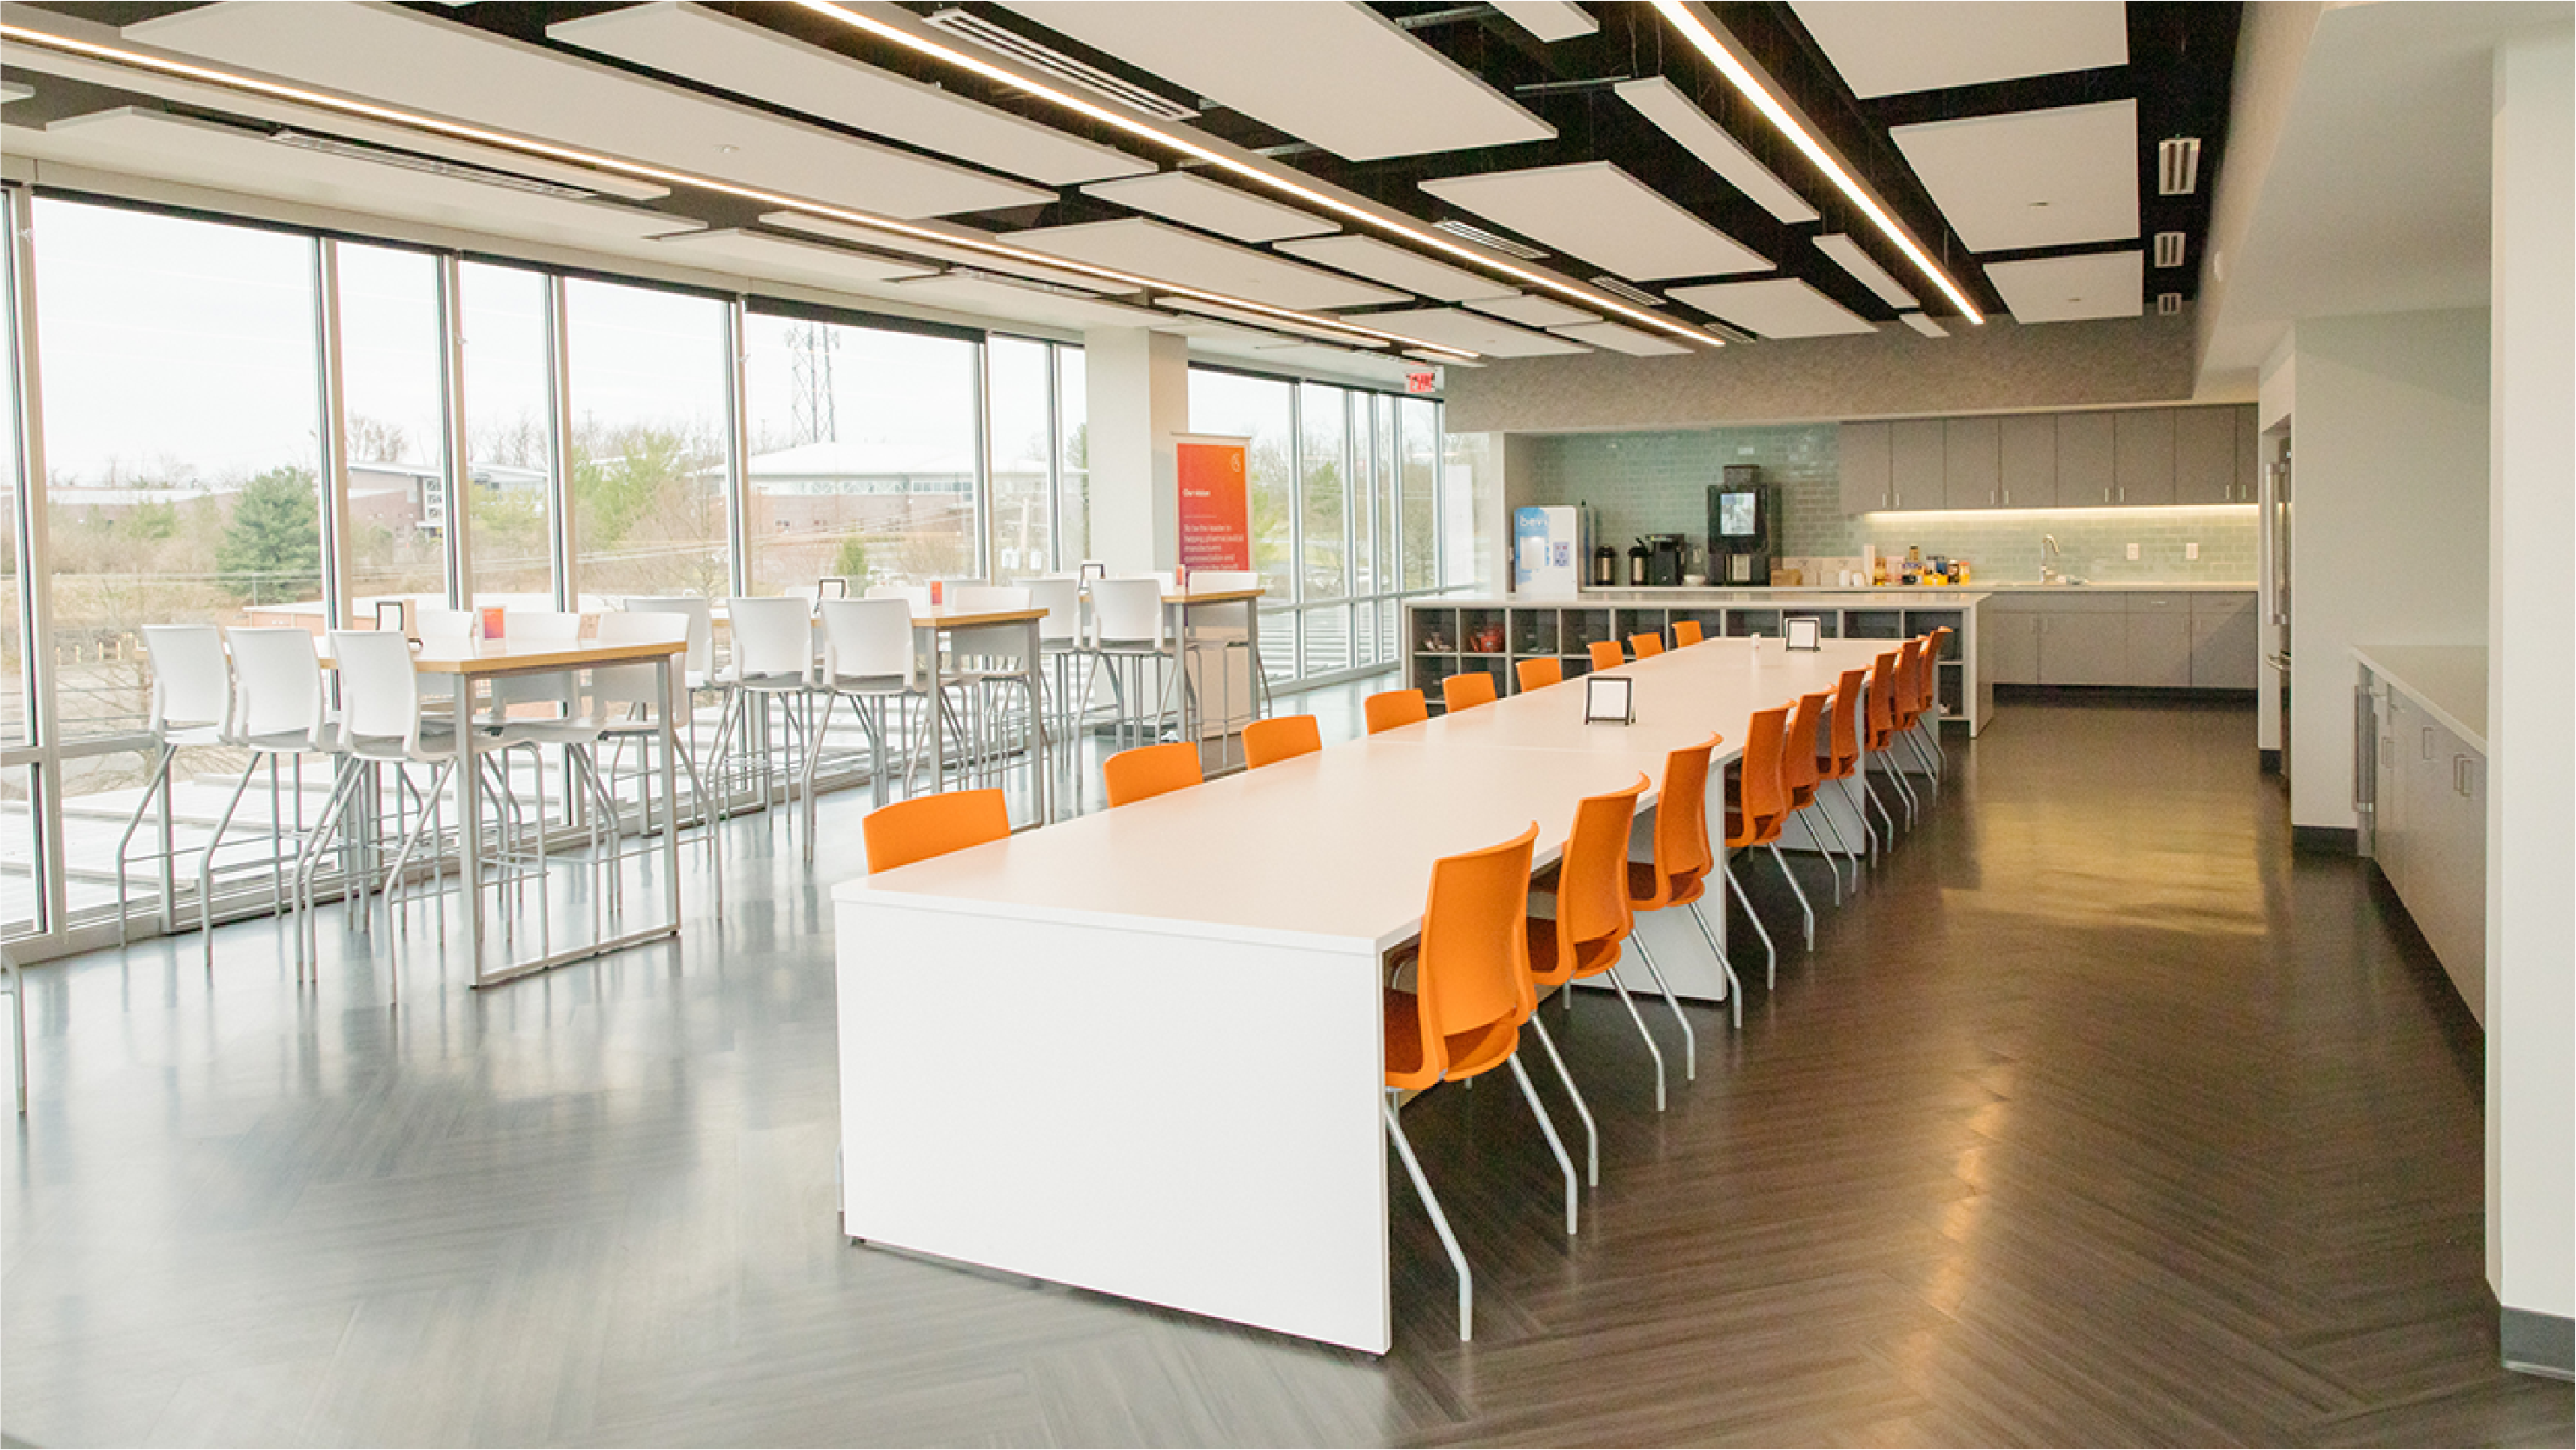 Café inside of Beacon I with bright orange chairs, a white table, and floor-to-ceiling windows